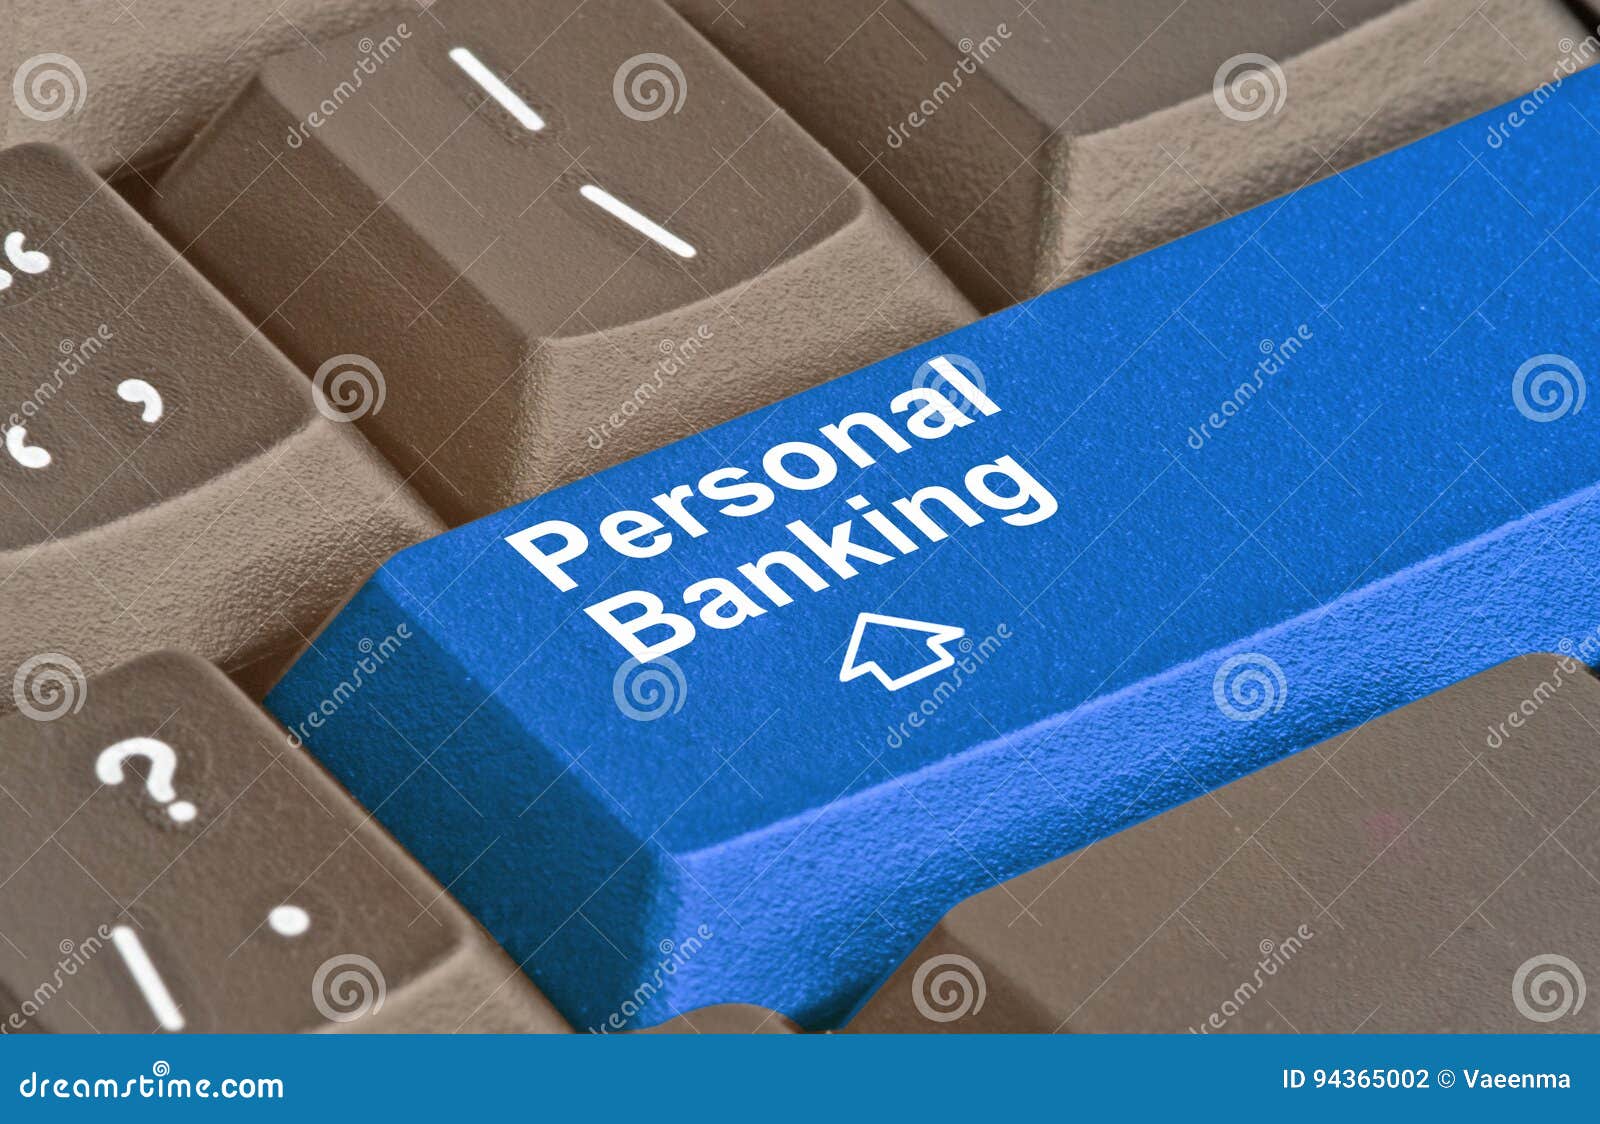 key for personal banking